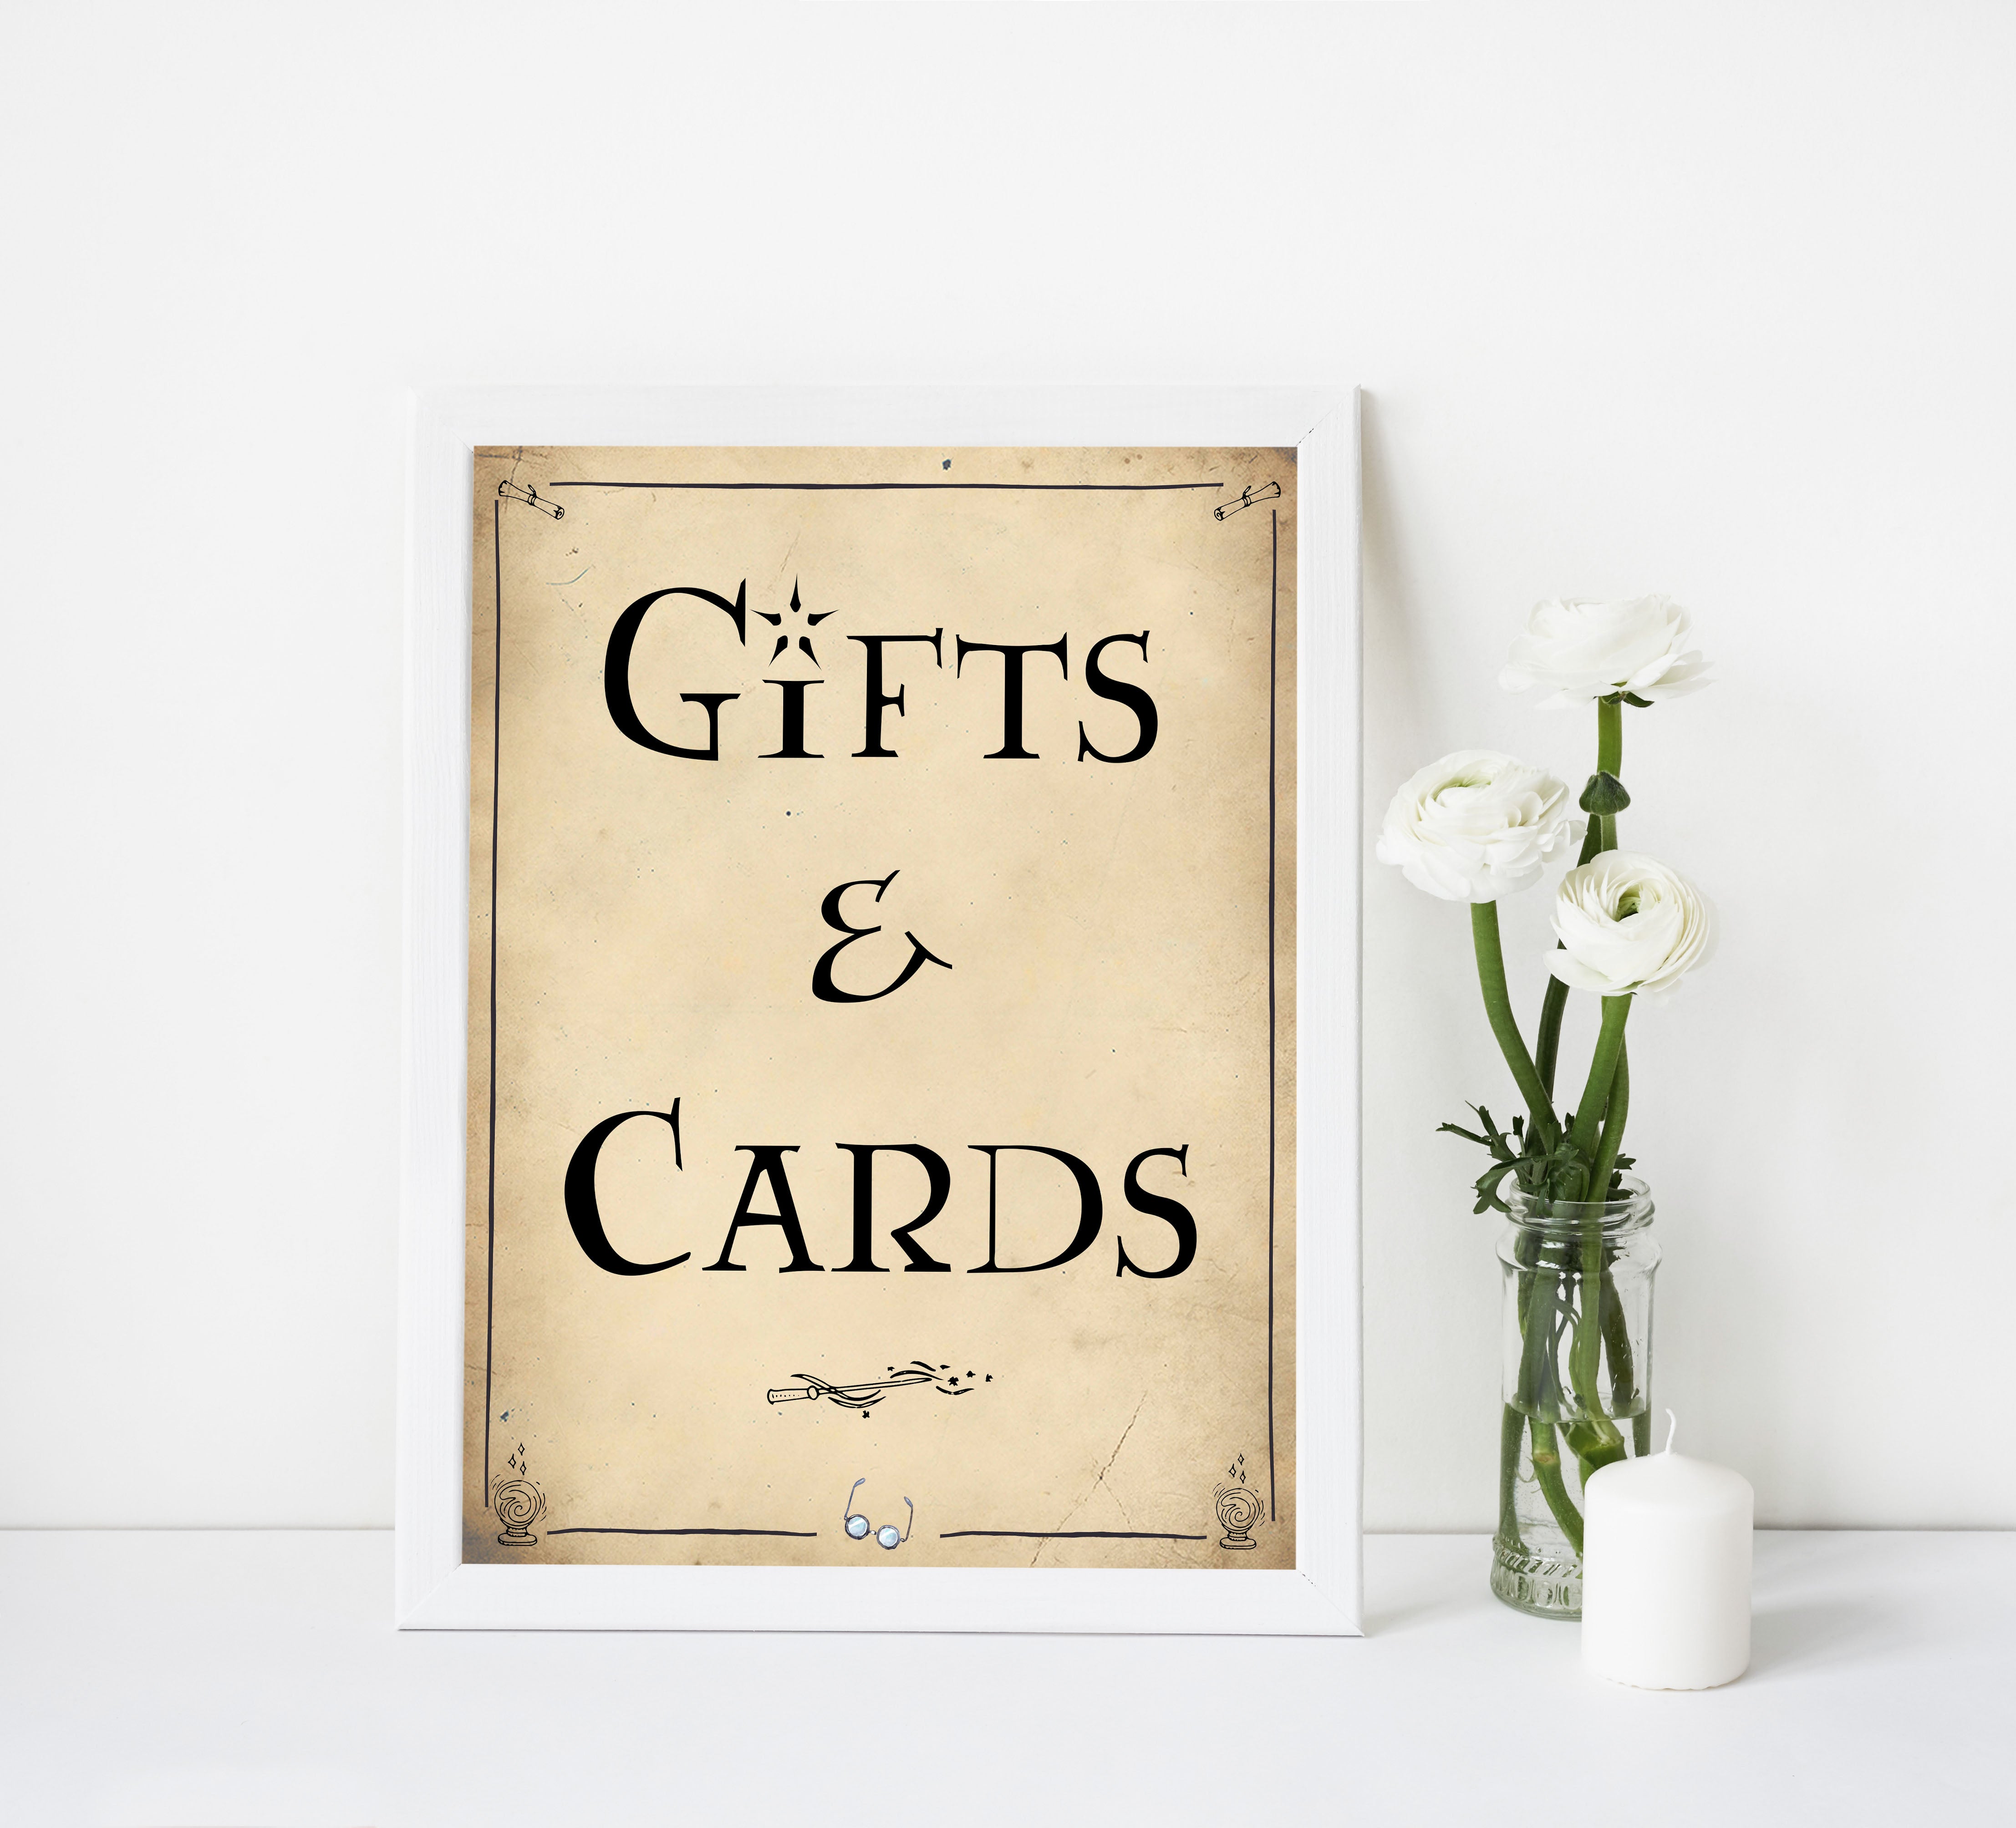 Favors Table Sign - Printable Harry Potter Party Stationery –  OhHappyPrintables